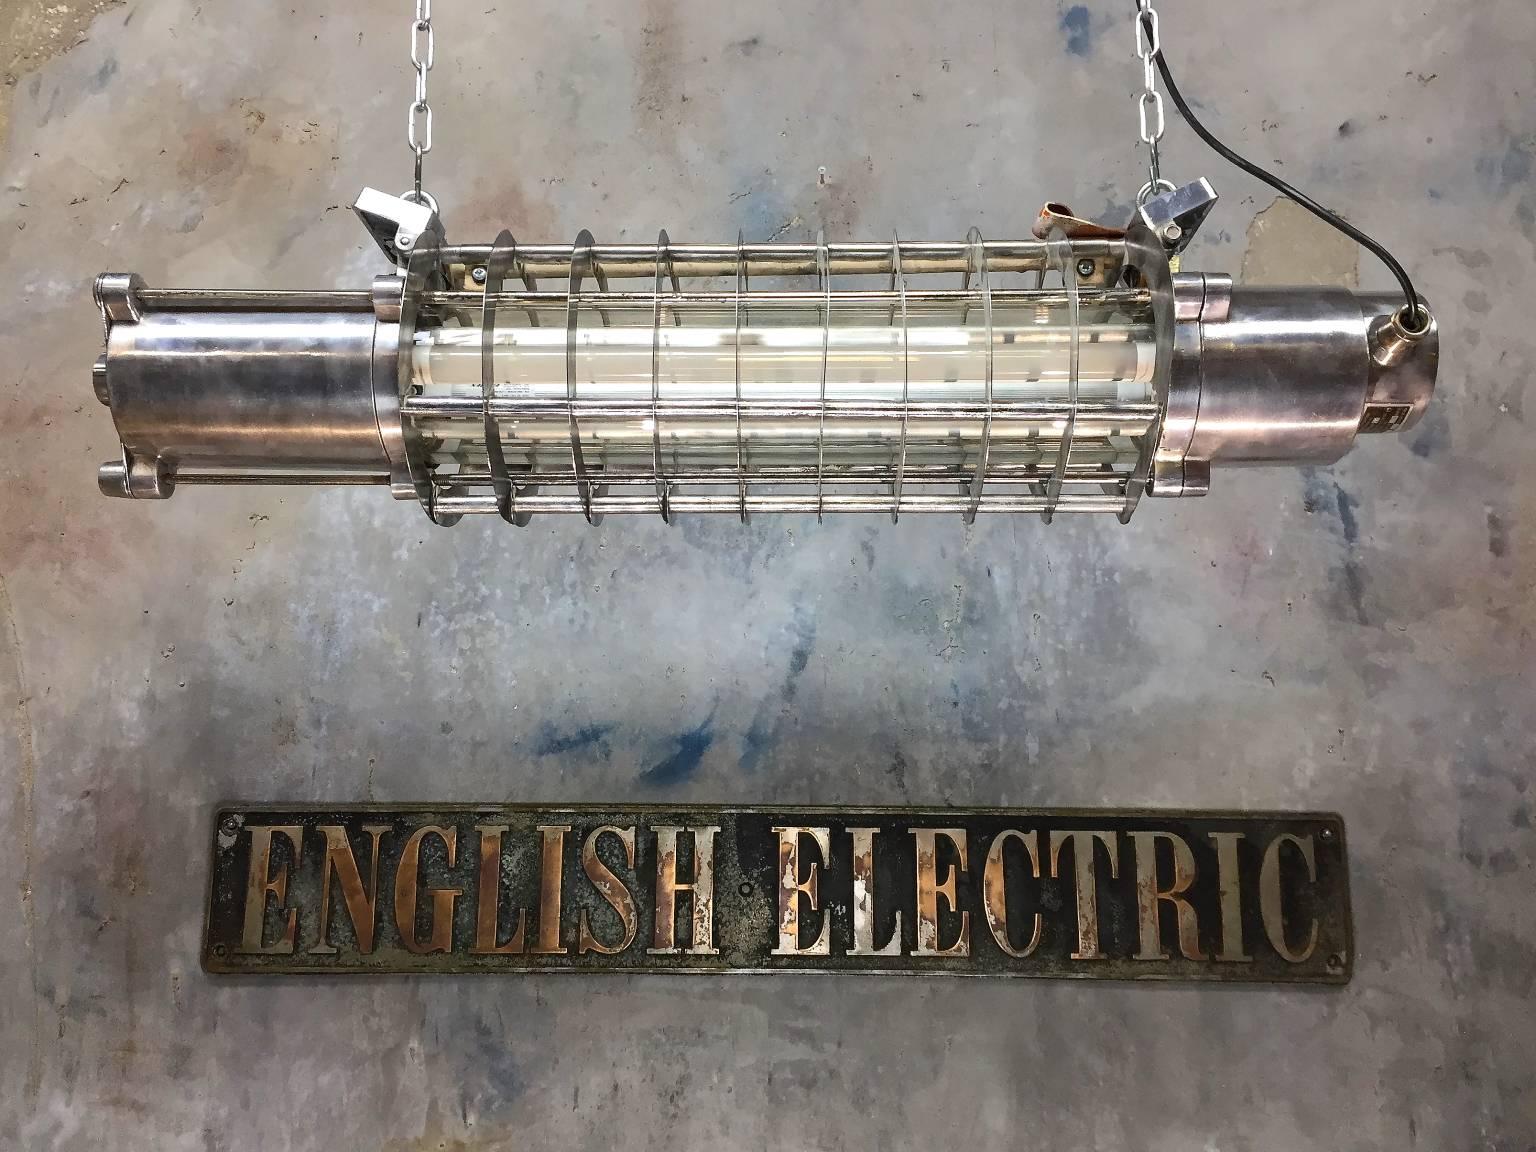 Original item salvaged from super tankers and military vessels, stripped and refinished in the UK.

The original wiring is replaced with our Loom light wiring system which exceeds the original specification and also conforms to British